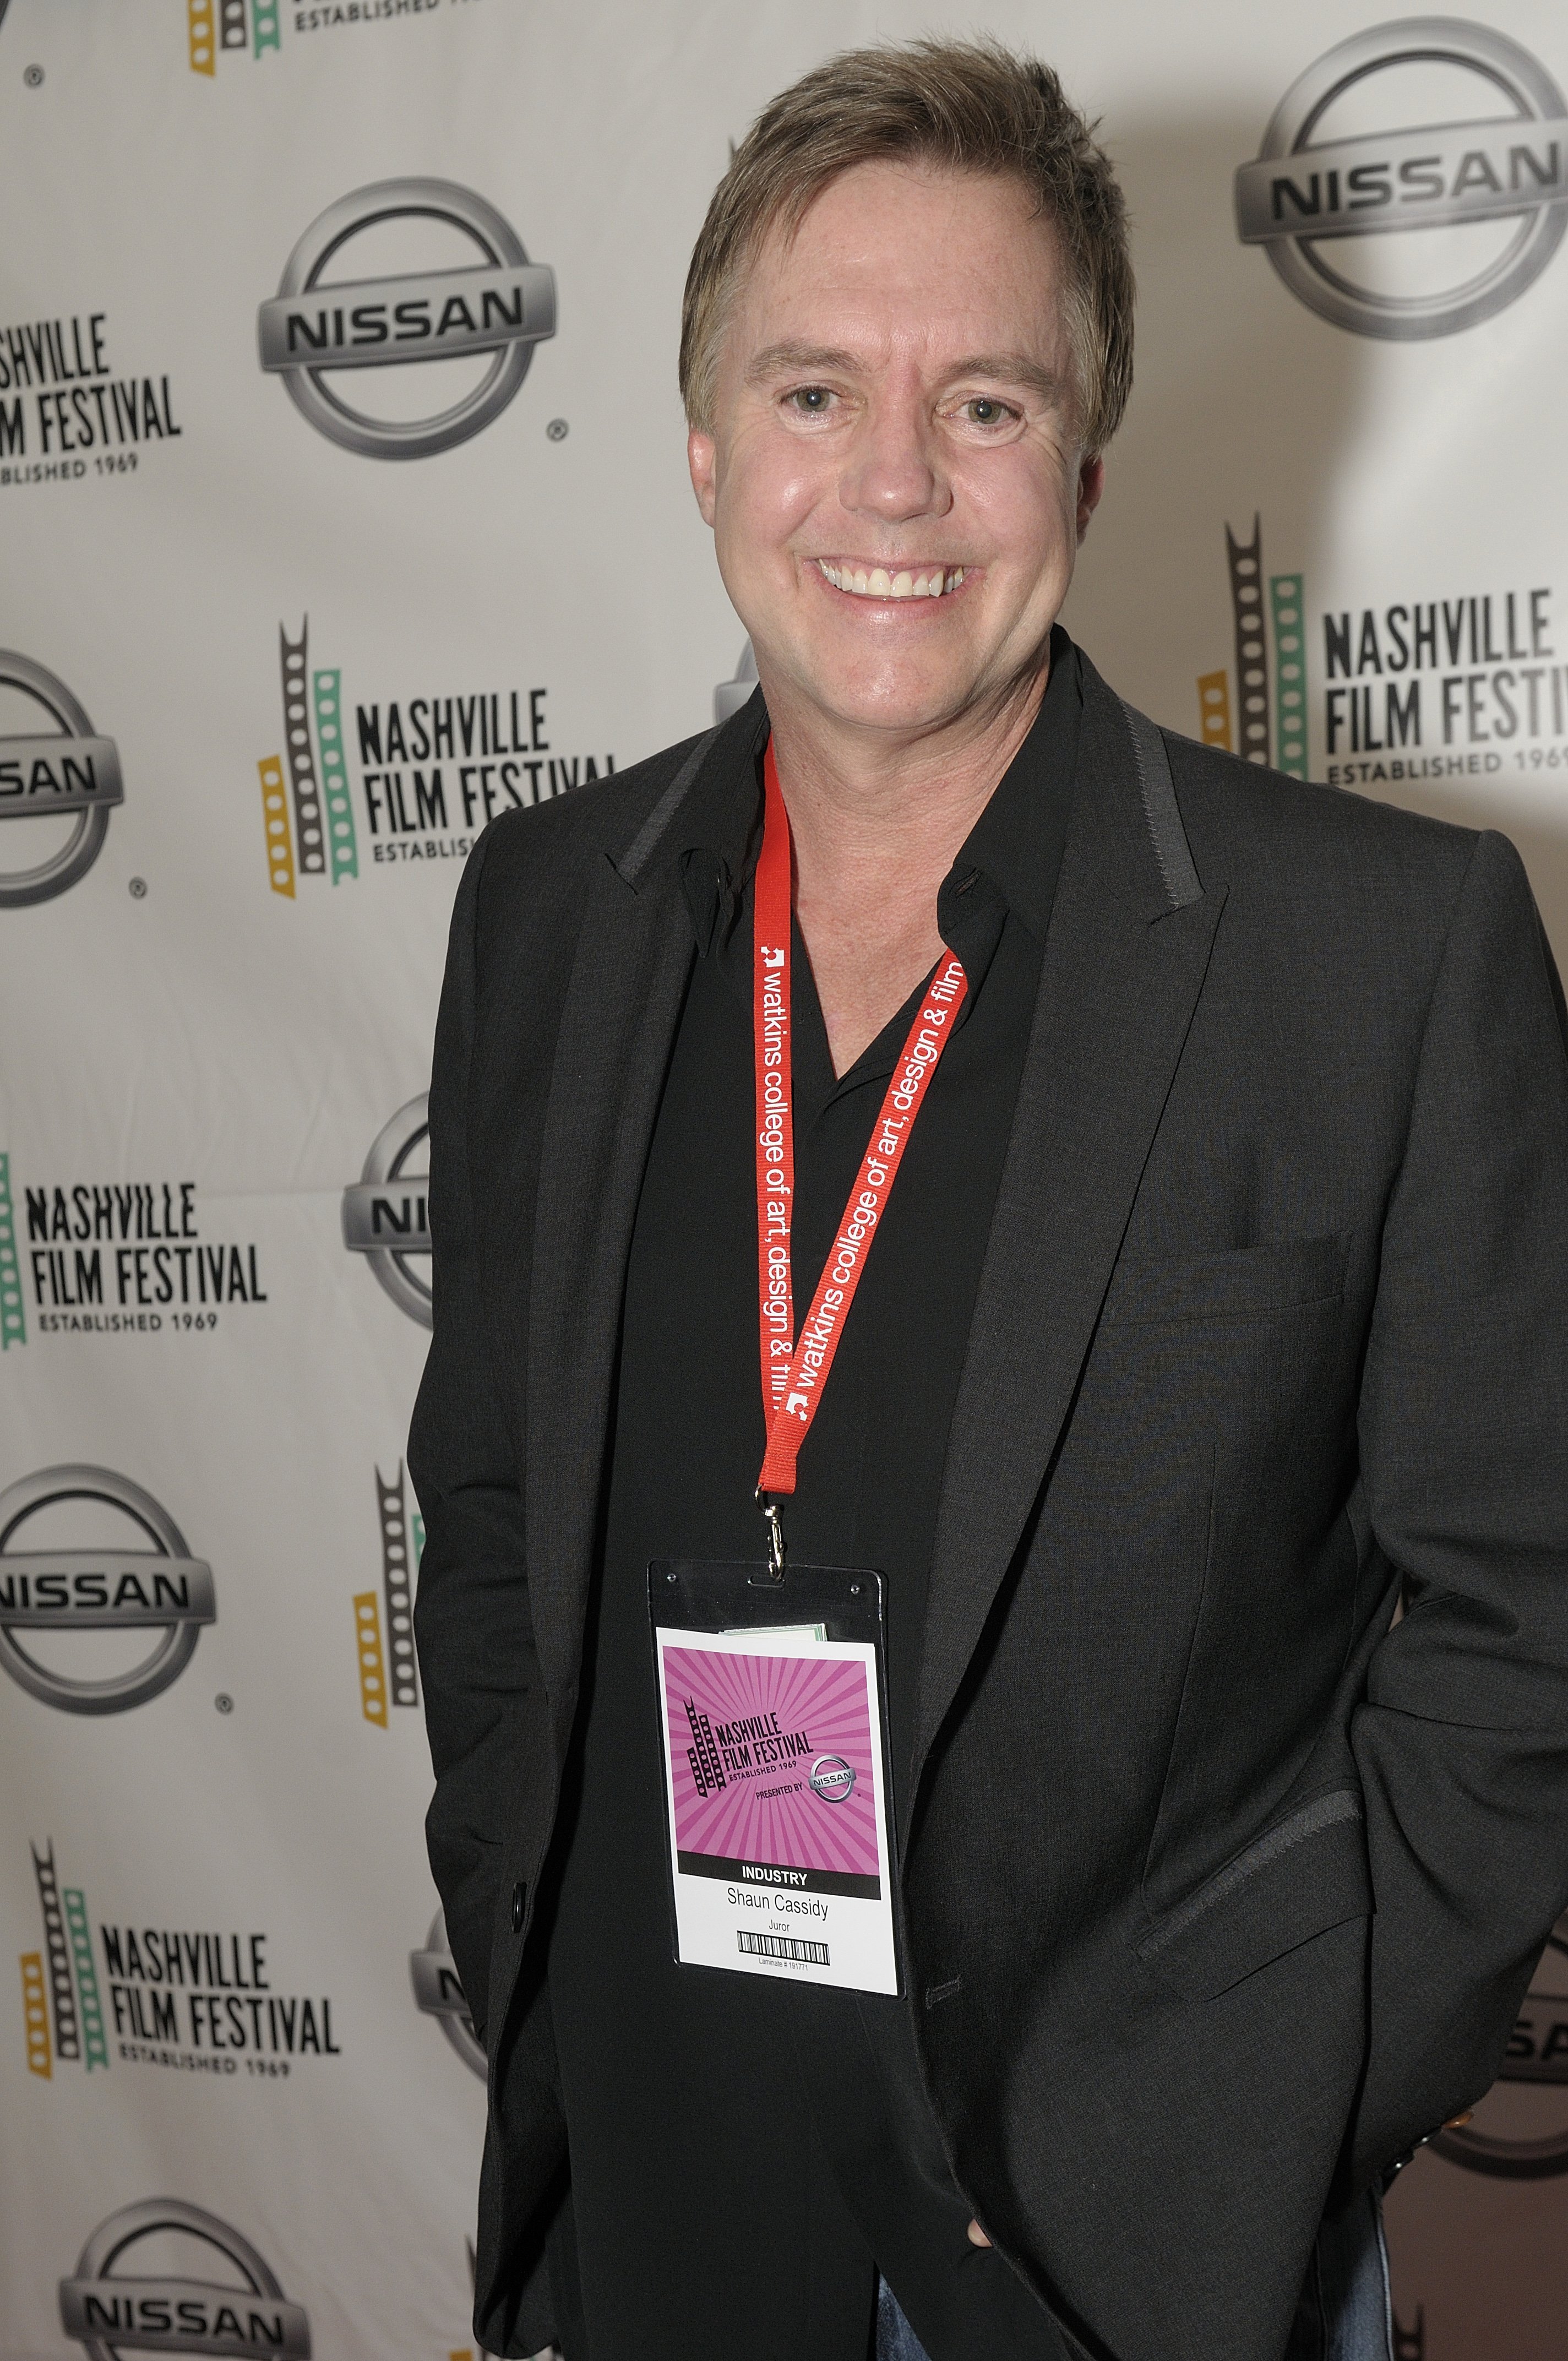 Shaun Cassidy on April 14, 2011 in Nashville, Tennessee | Source: Getty Images